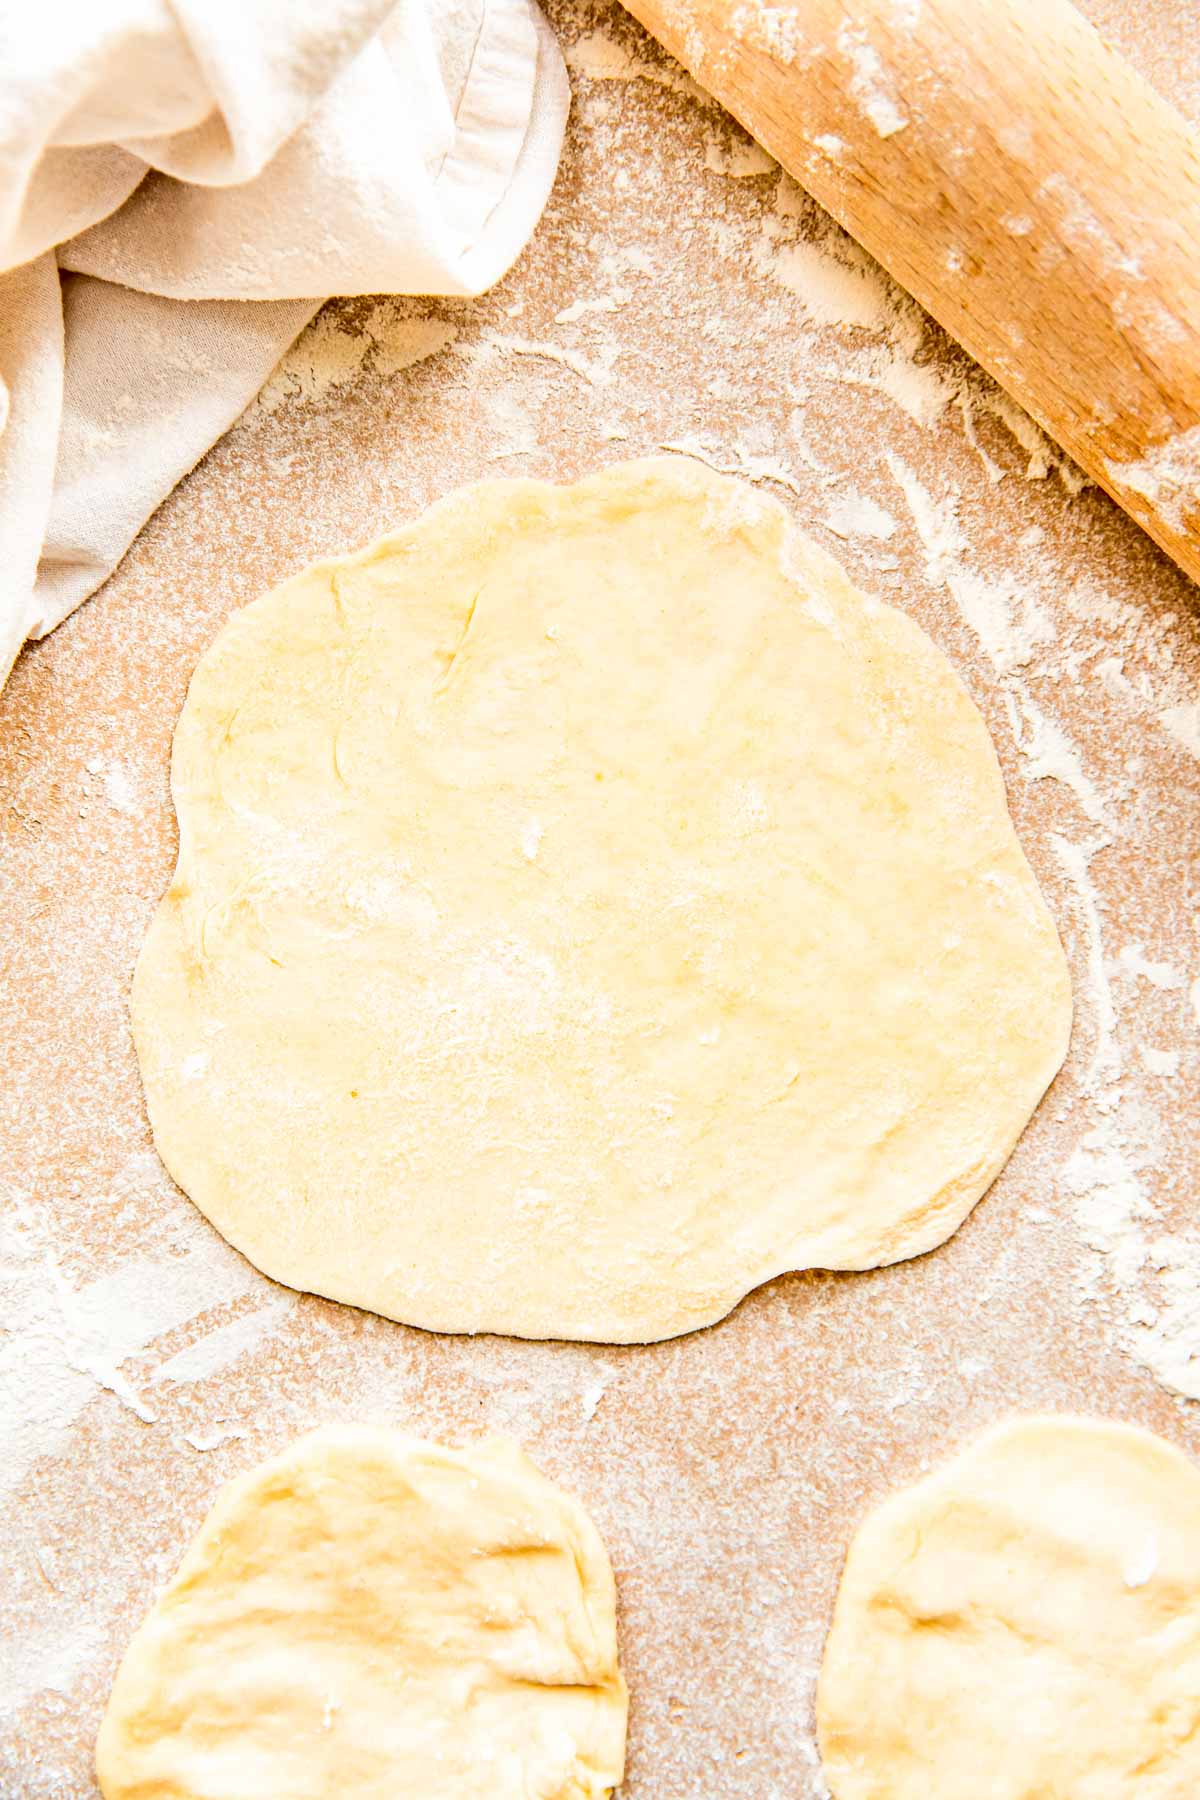 dough is rolled out into a 6 inch diameter next to a rolling pin